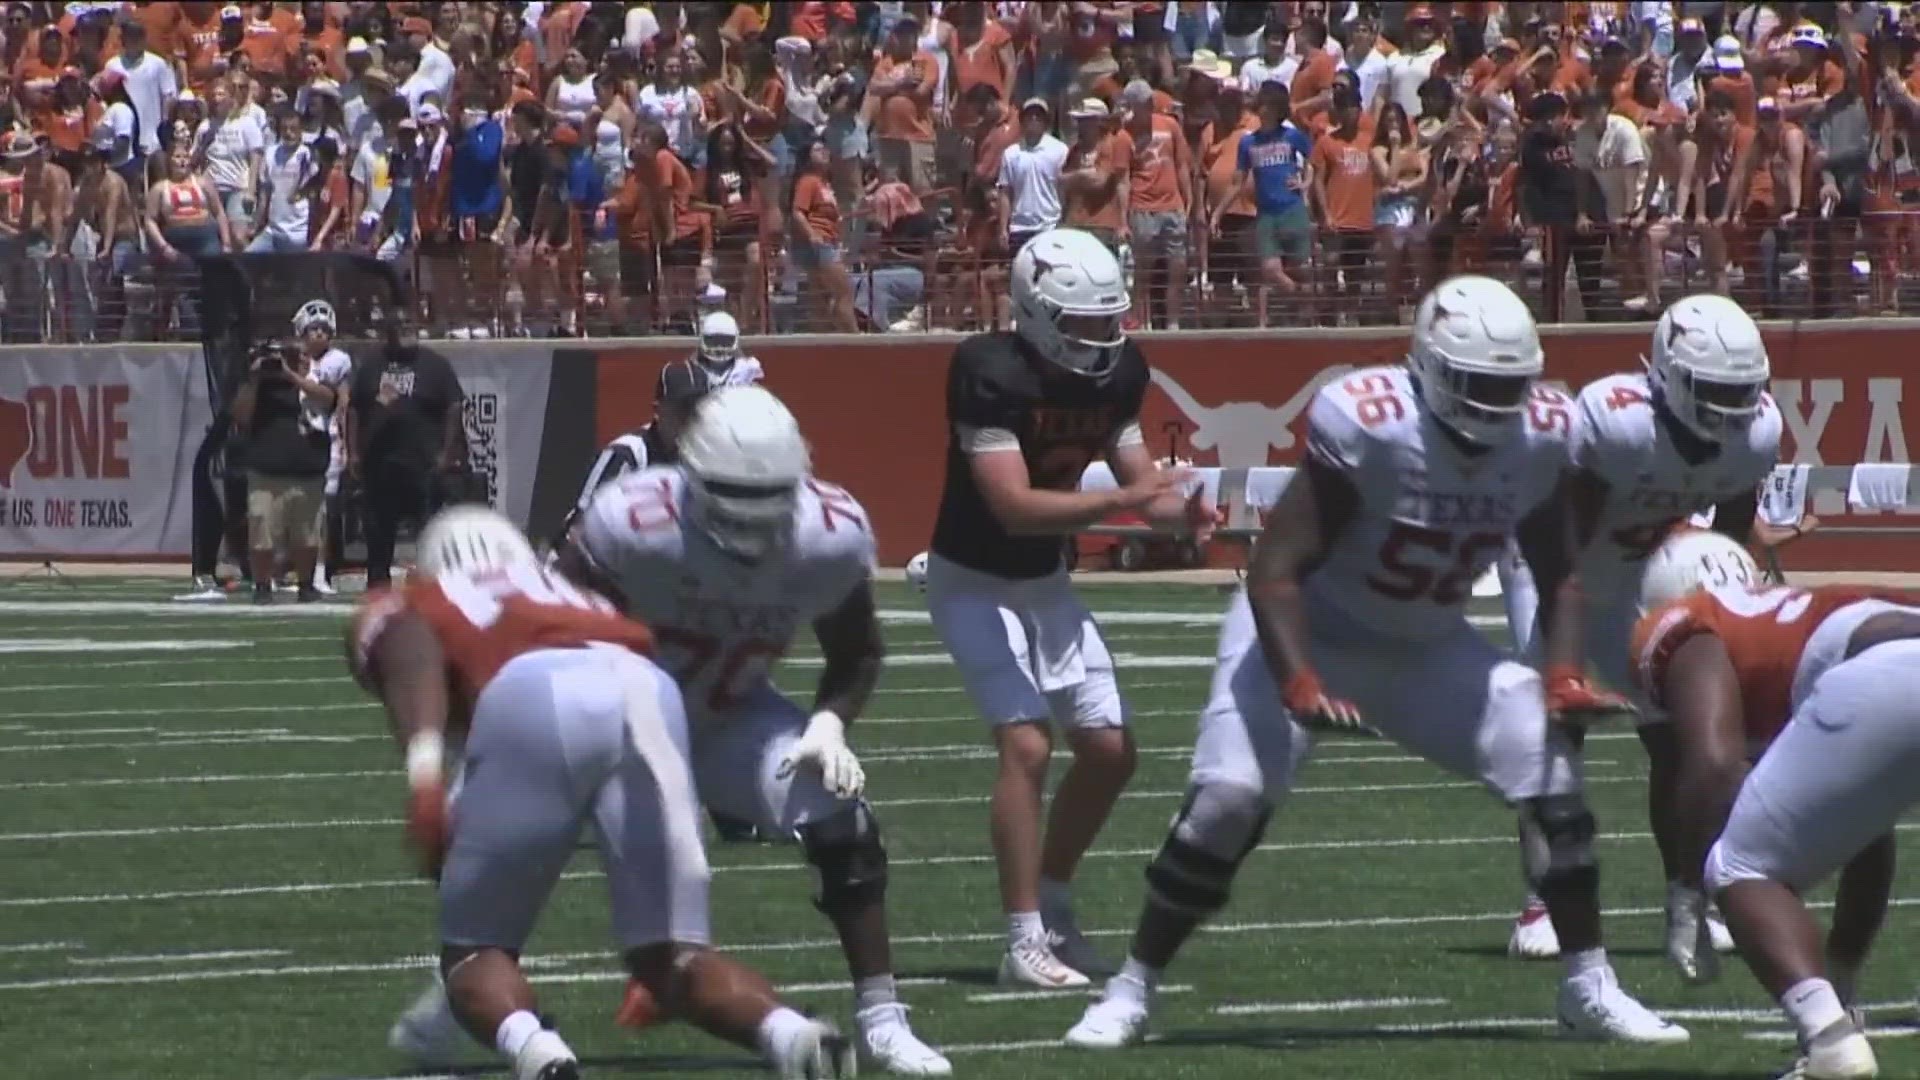 Texas's Orange and White scrimmage is a chance for players to shine on the field. That's particularly true for new faces on campus.